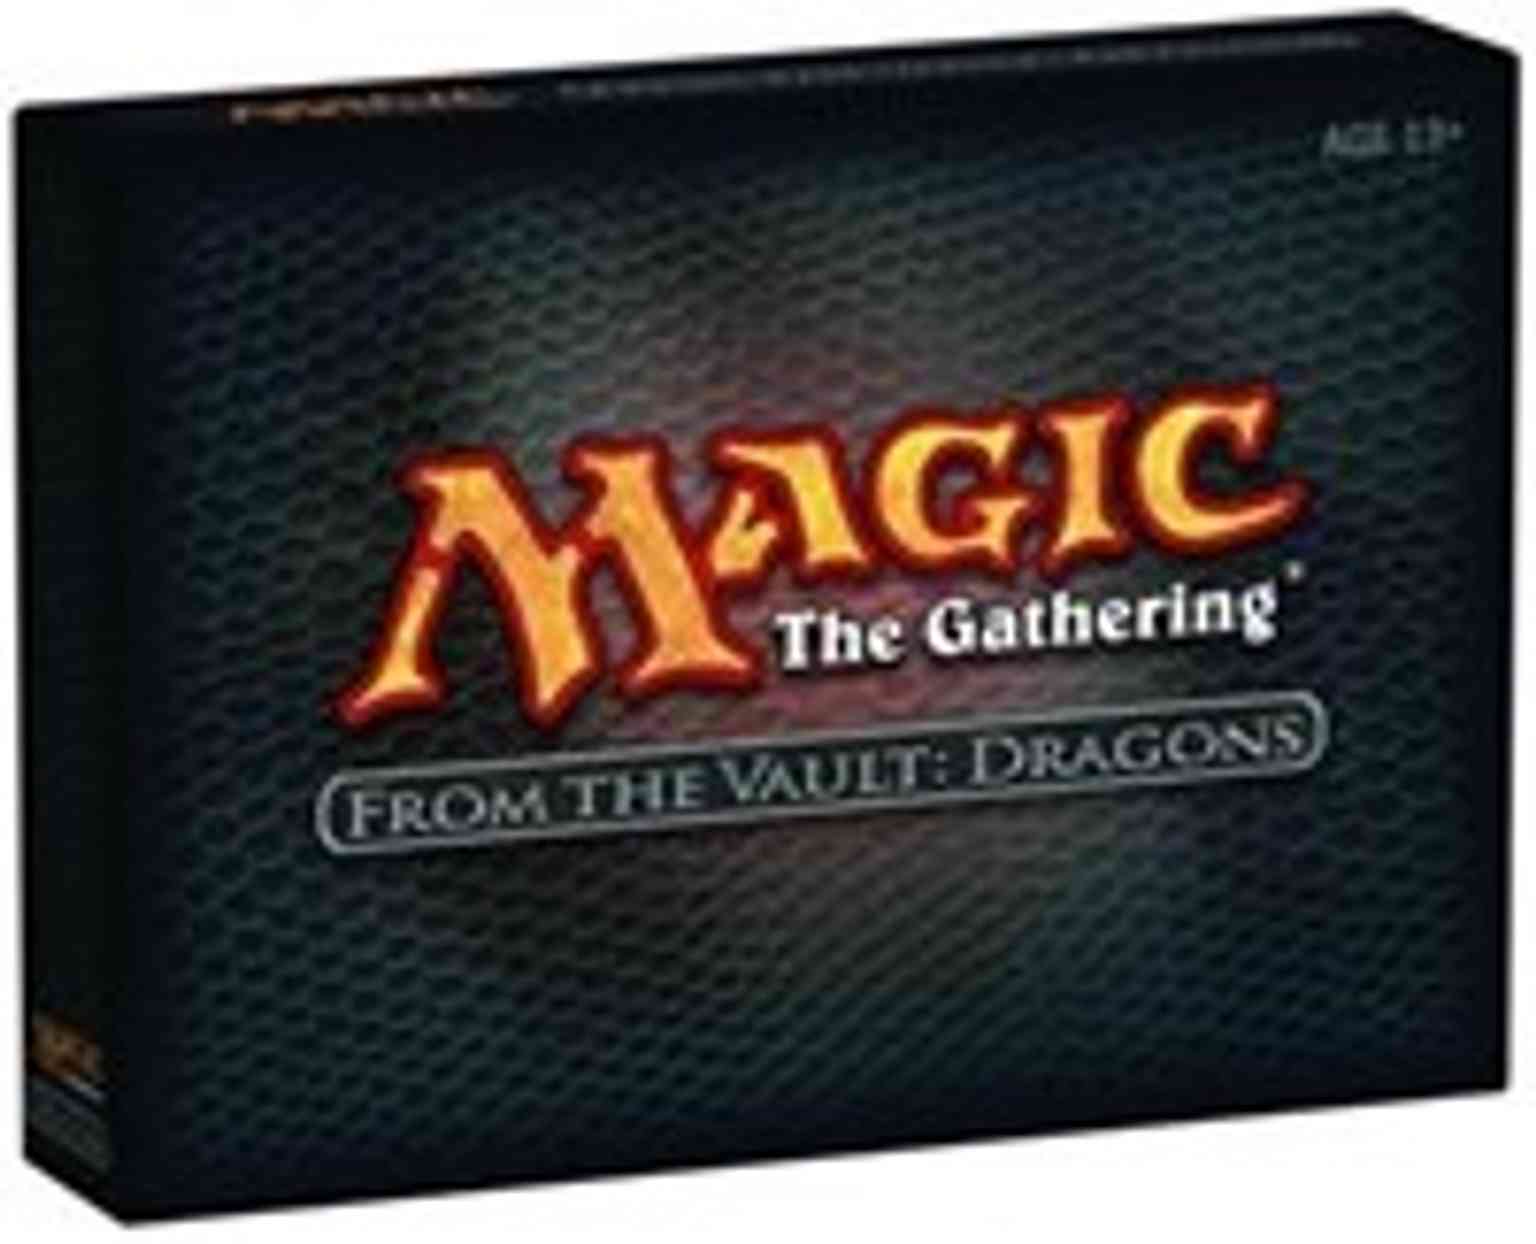 From the Vault: Dragons - Box Set magic card front